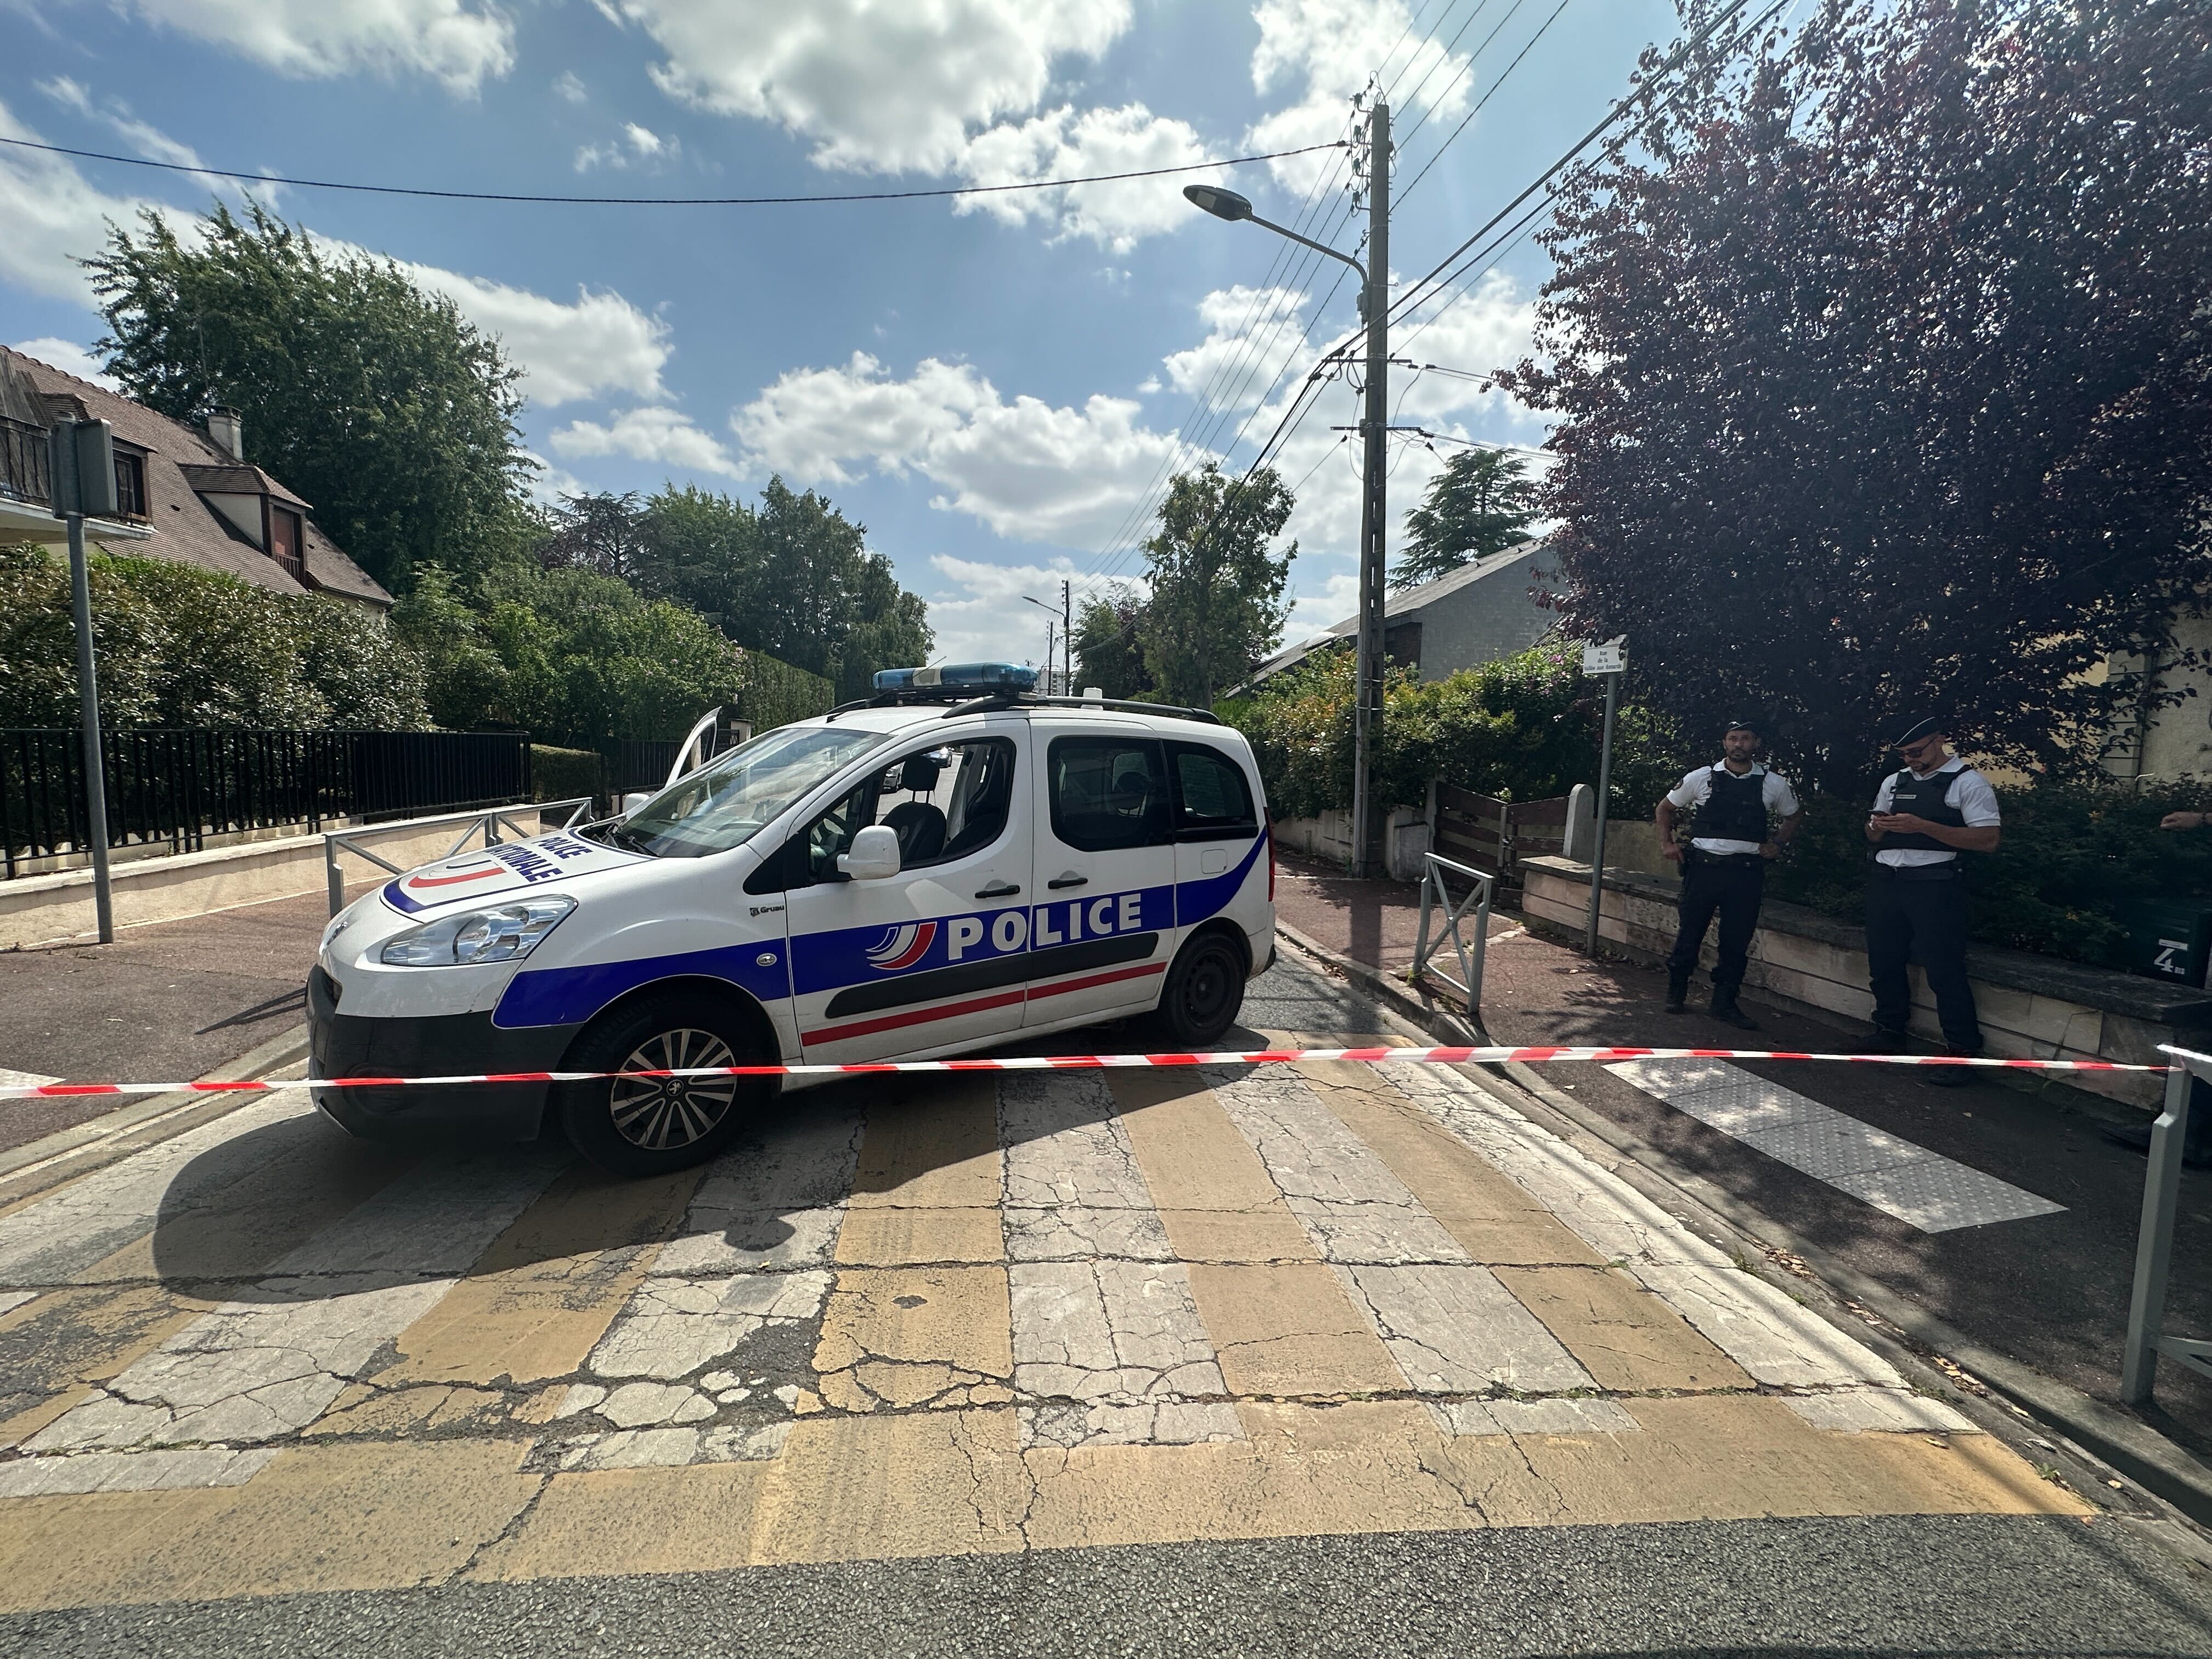 The attack took place at the home of a suburban Parisian mayor